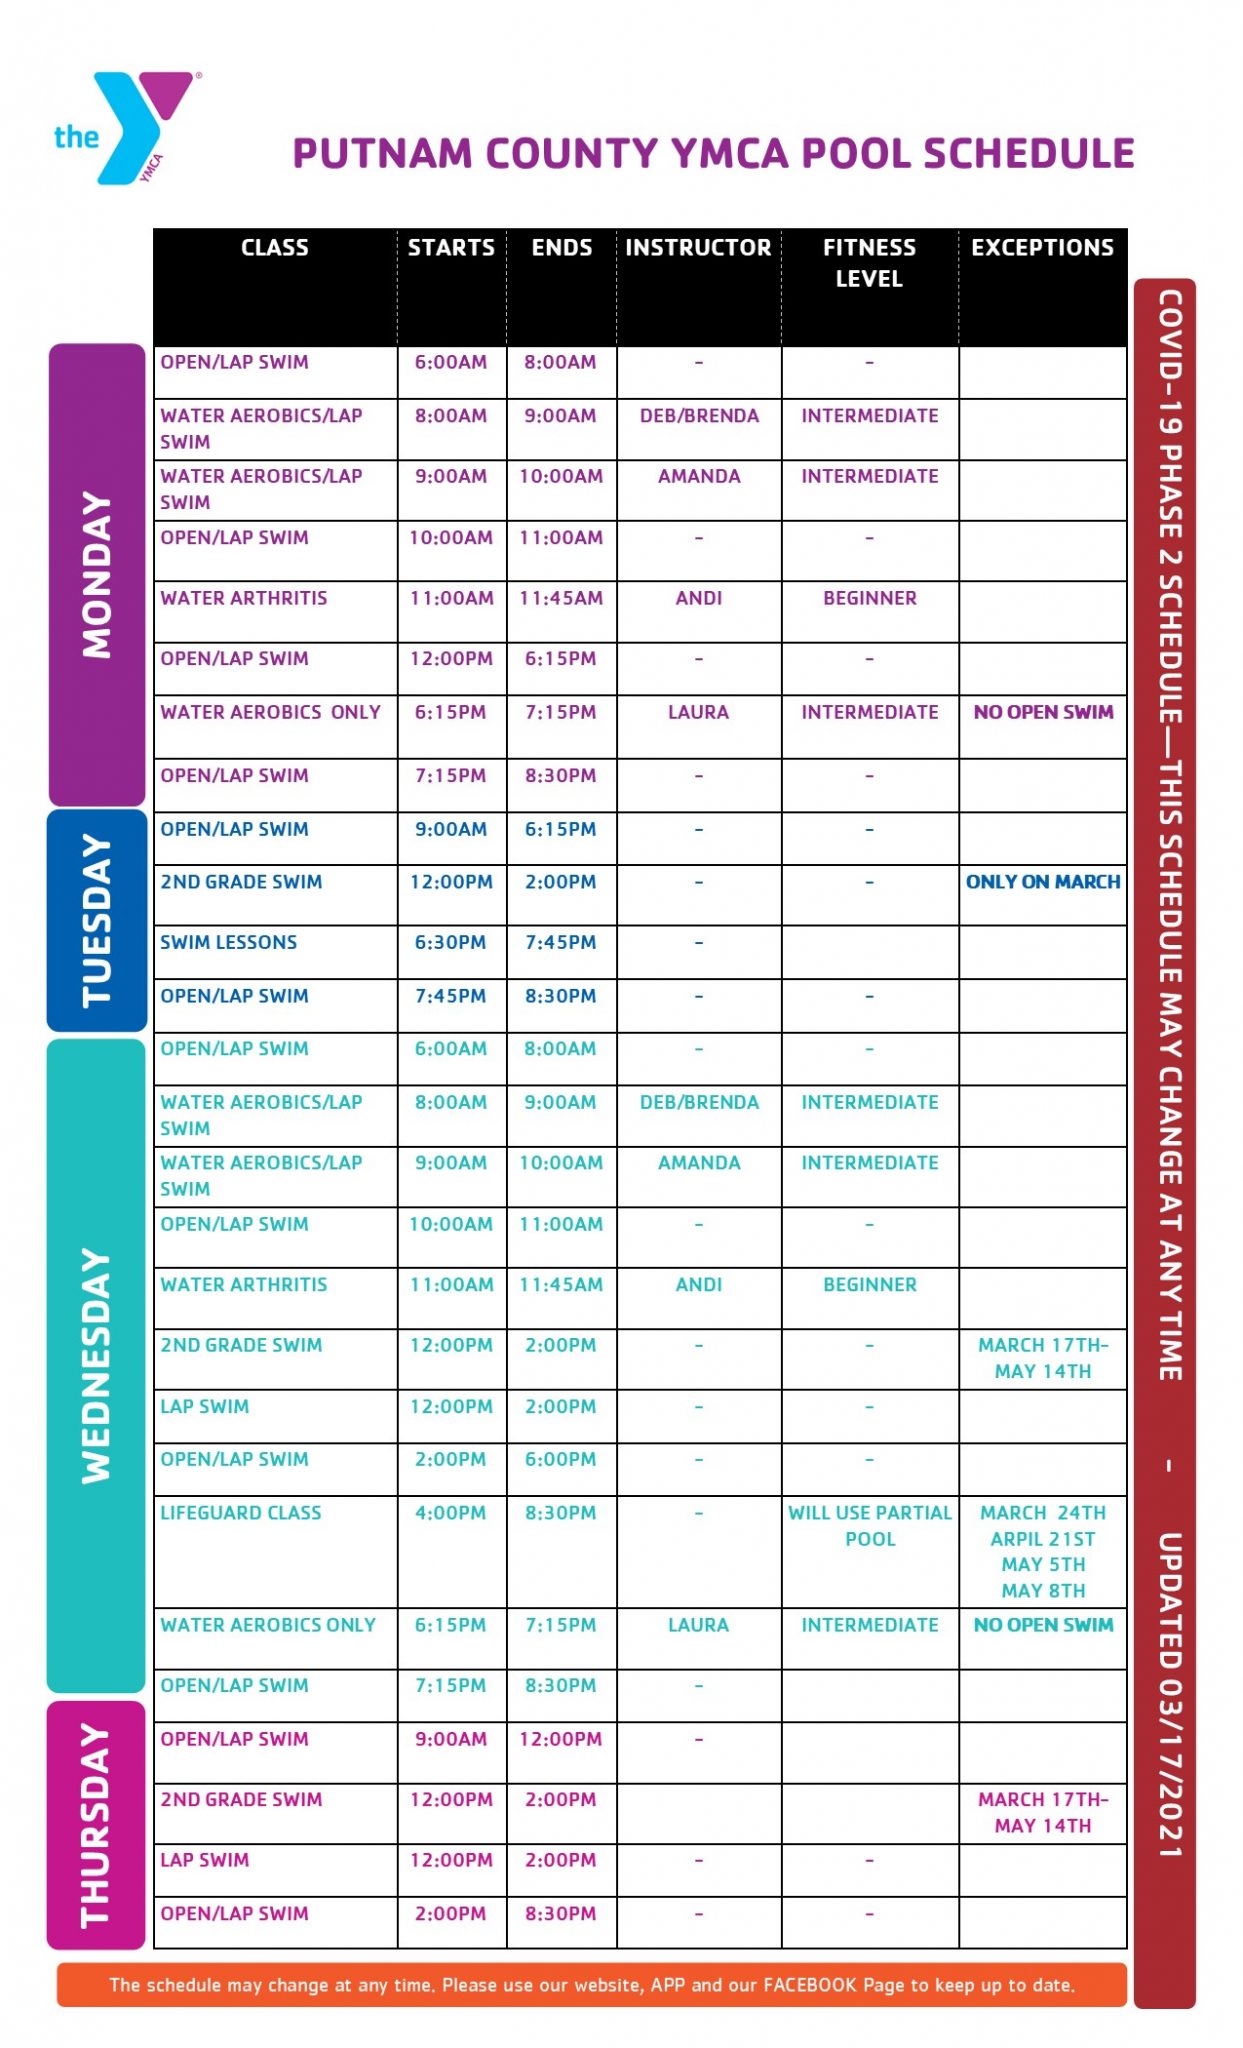 Pool Schedule Phase 2  Putnam County YMCA